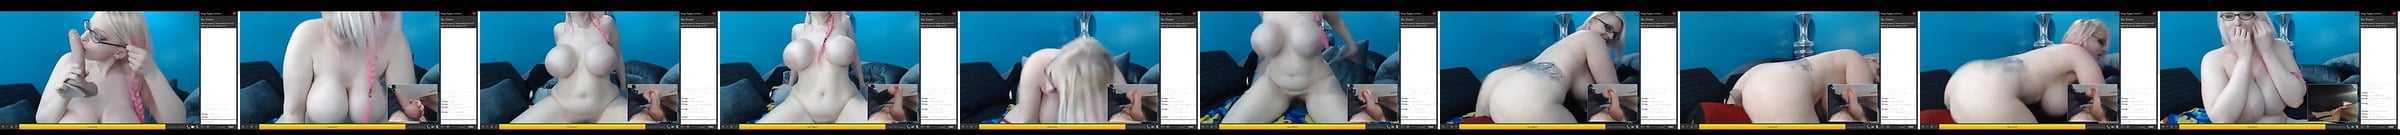 Featured Pinky Porn Videos Xhamster